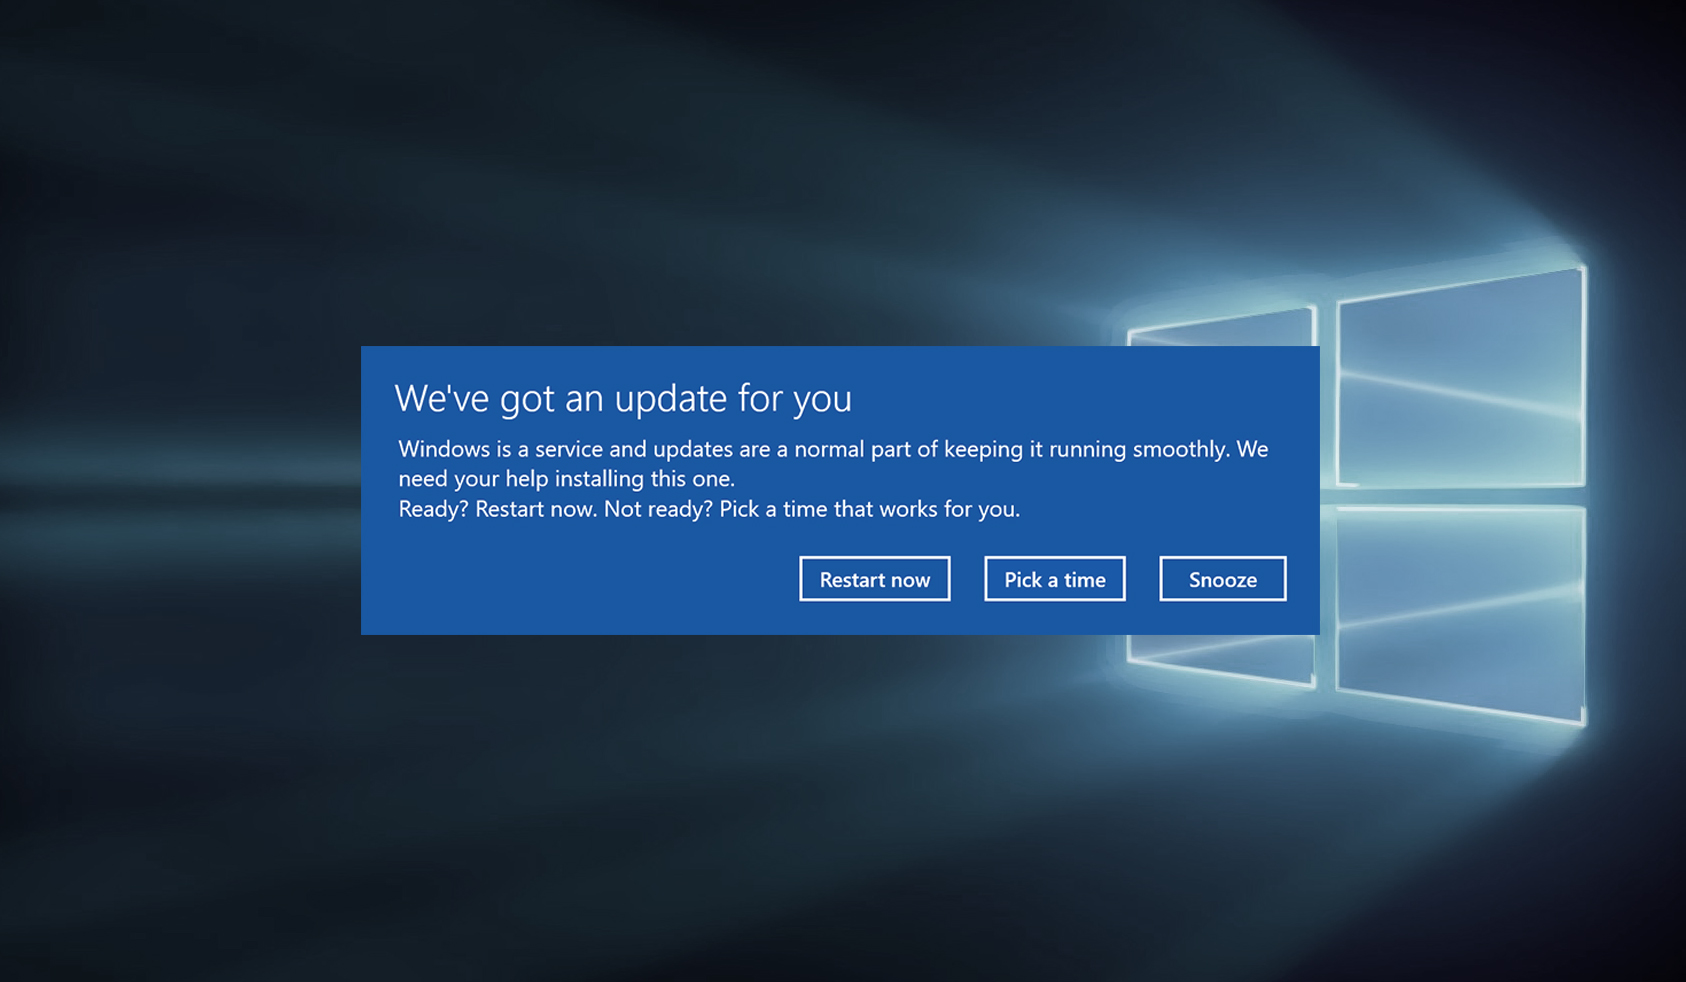 upgrade to windows 11 download